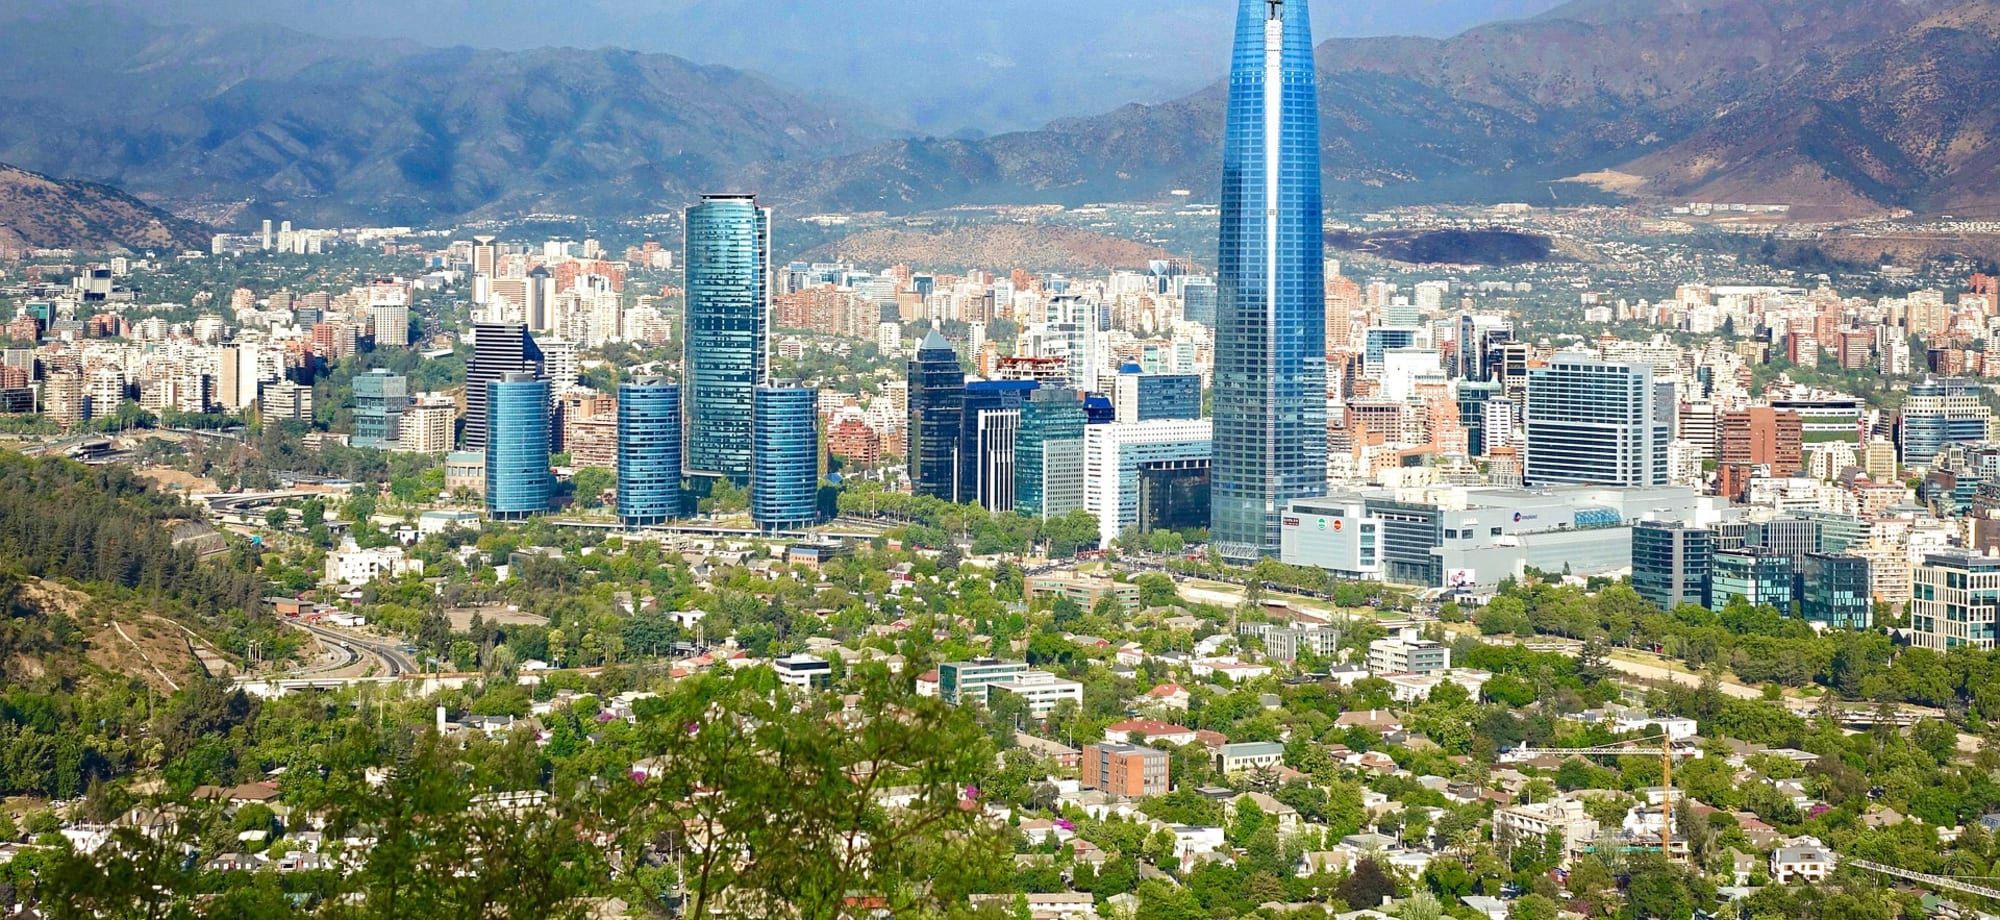 The city of Santiago in Central Chile is surrounded by mountains and interspersed with skyscrapers, clusters of buildings and trees. 